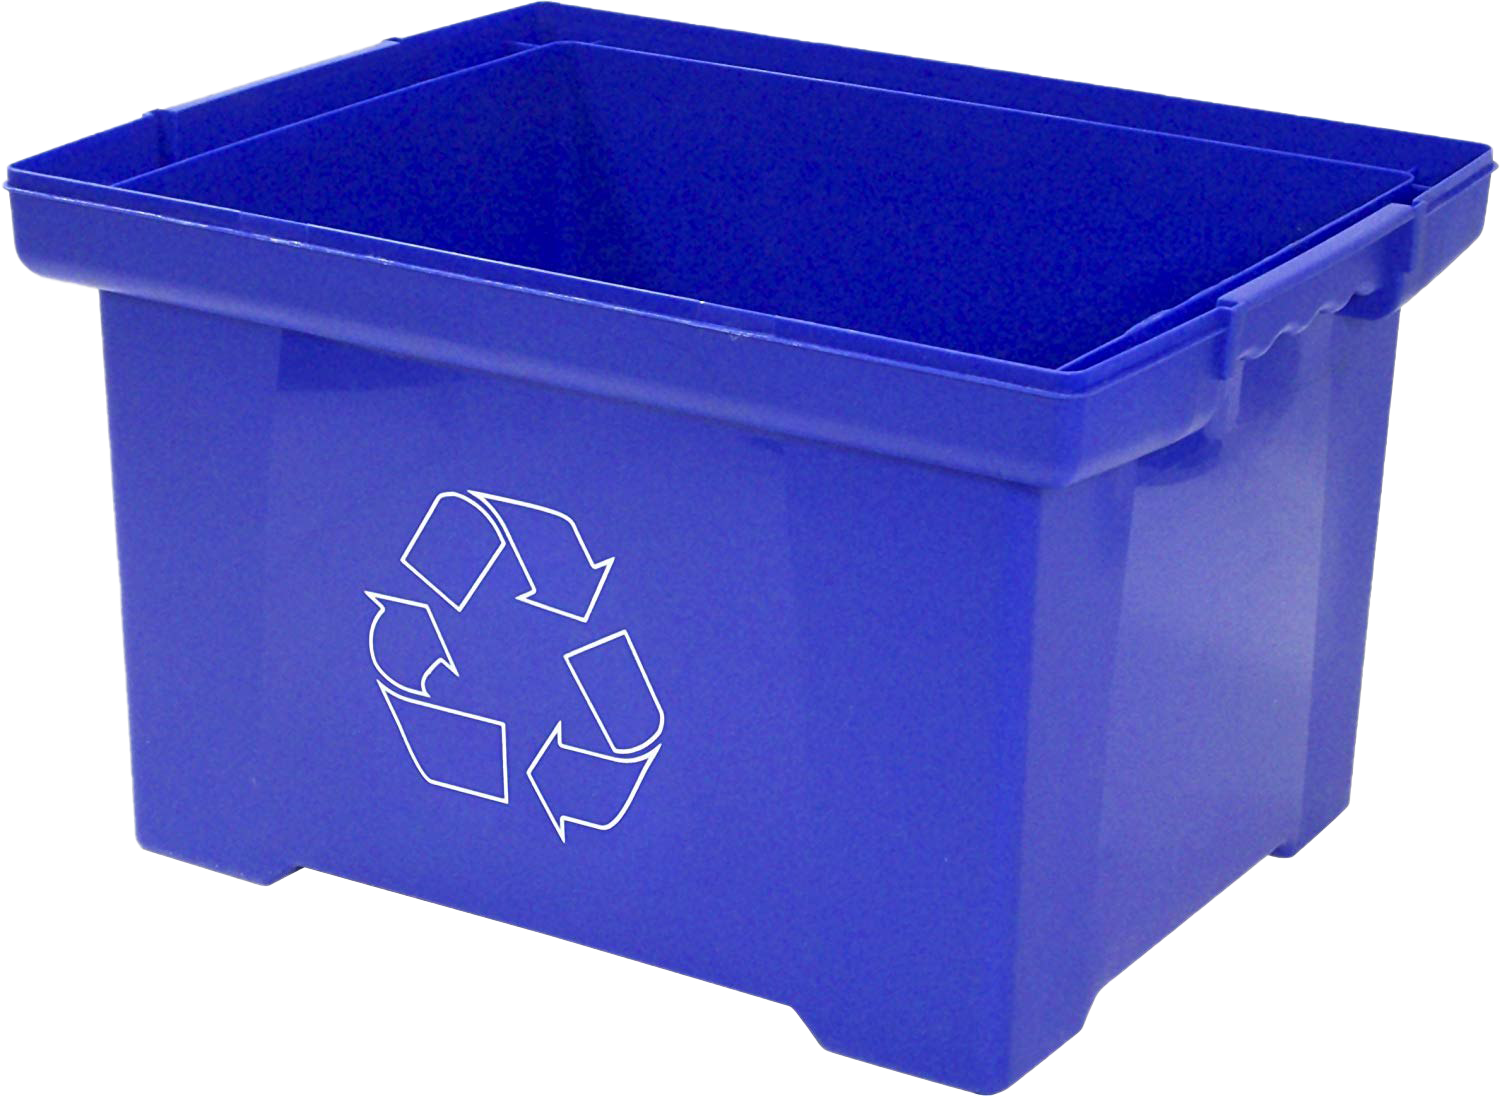 Blue Recycle Bin Download Free PNG